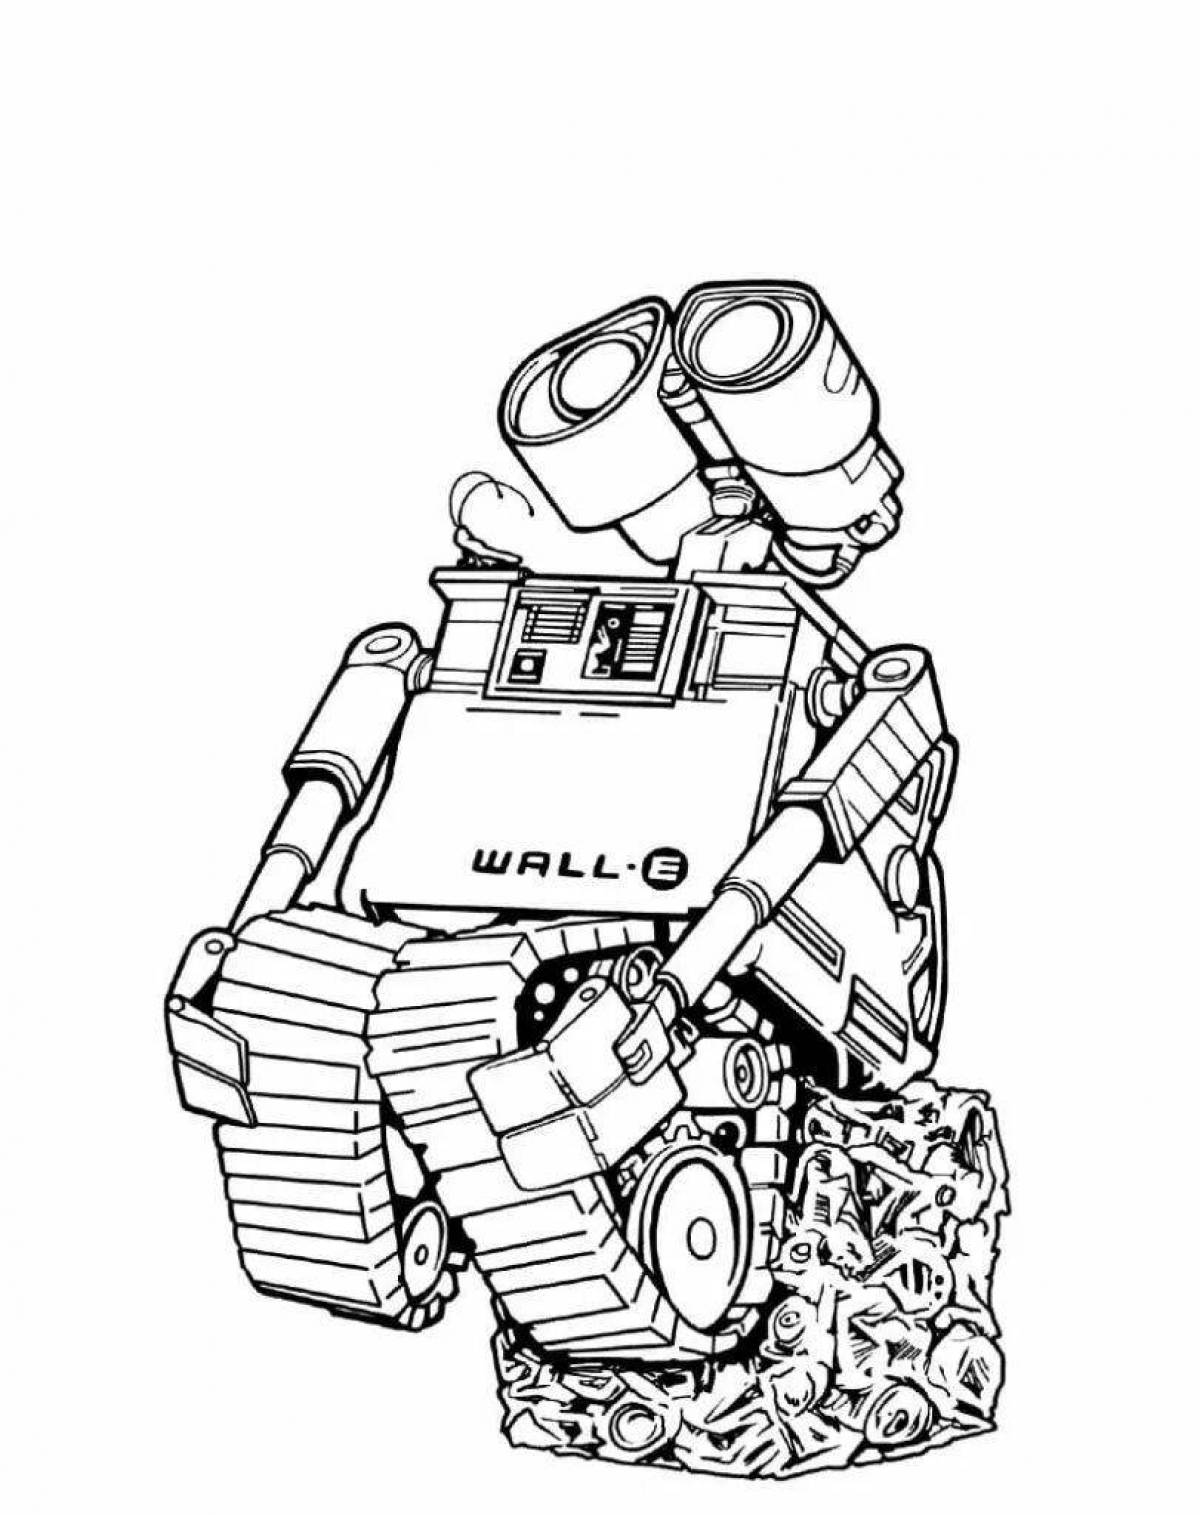 Vibrant robot valley coloring page